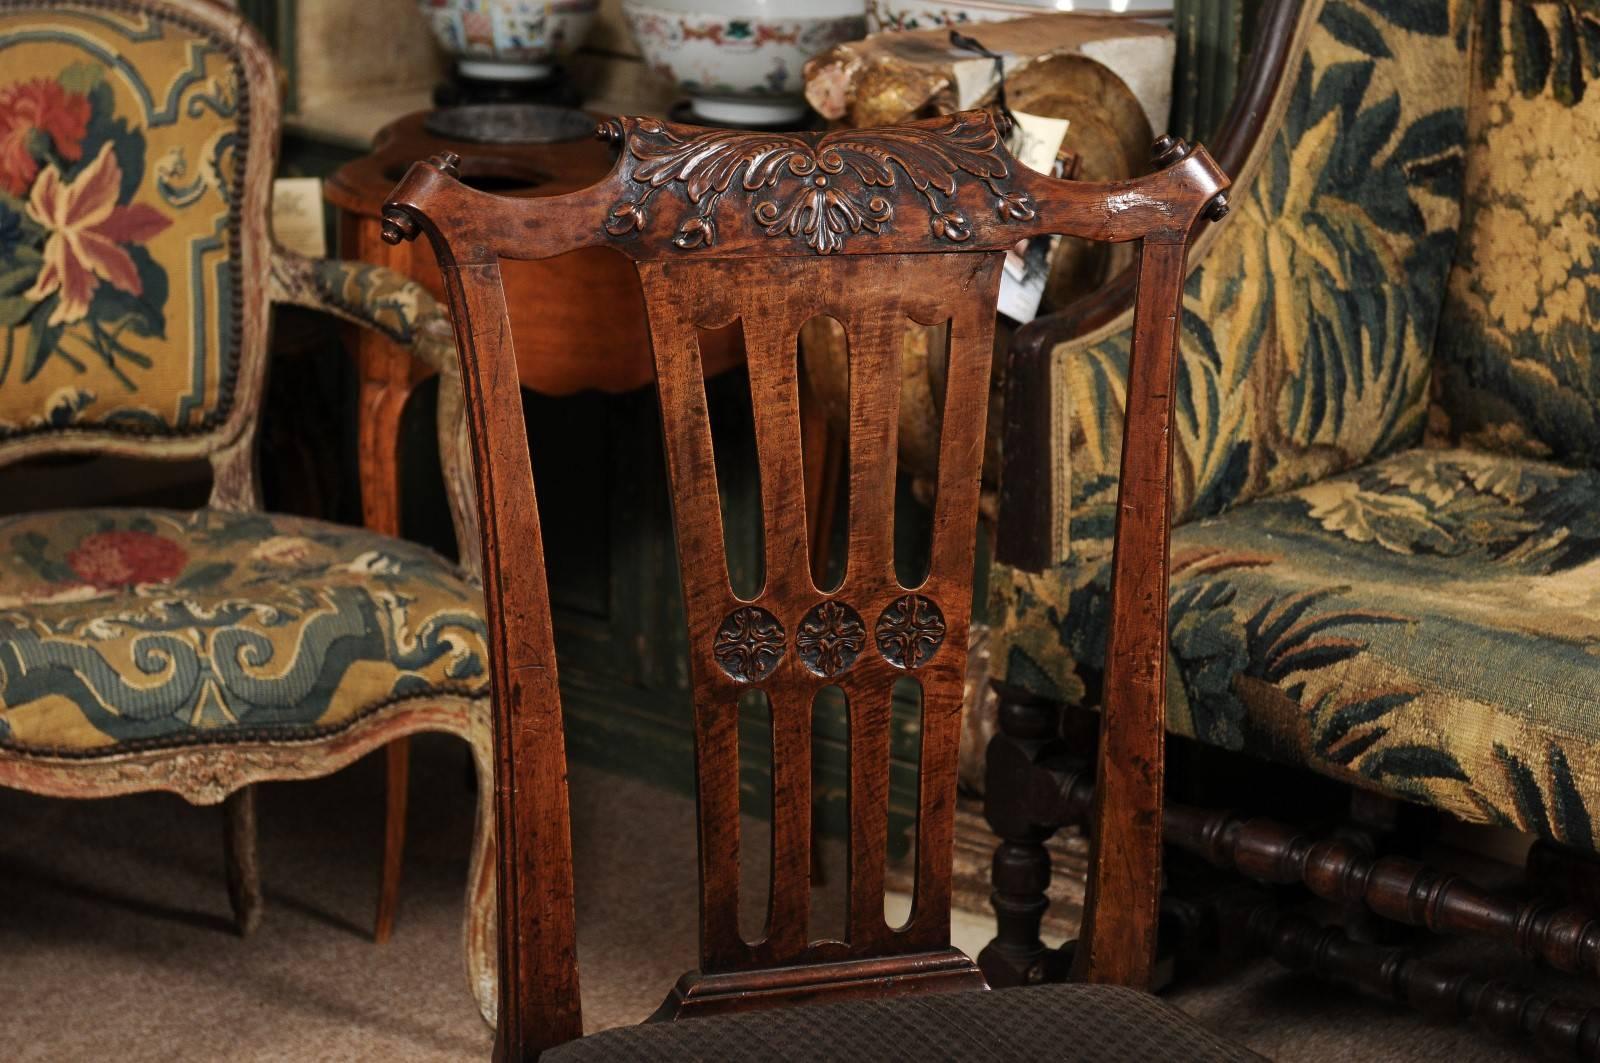 Mid-18th Century 18th Century English Chippendale Side Chair in Walnut with Pierced Back Splat